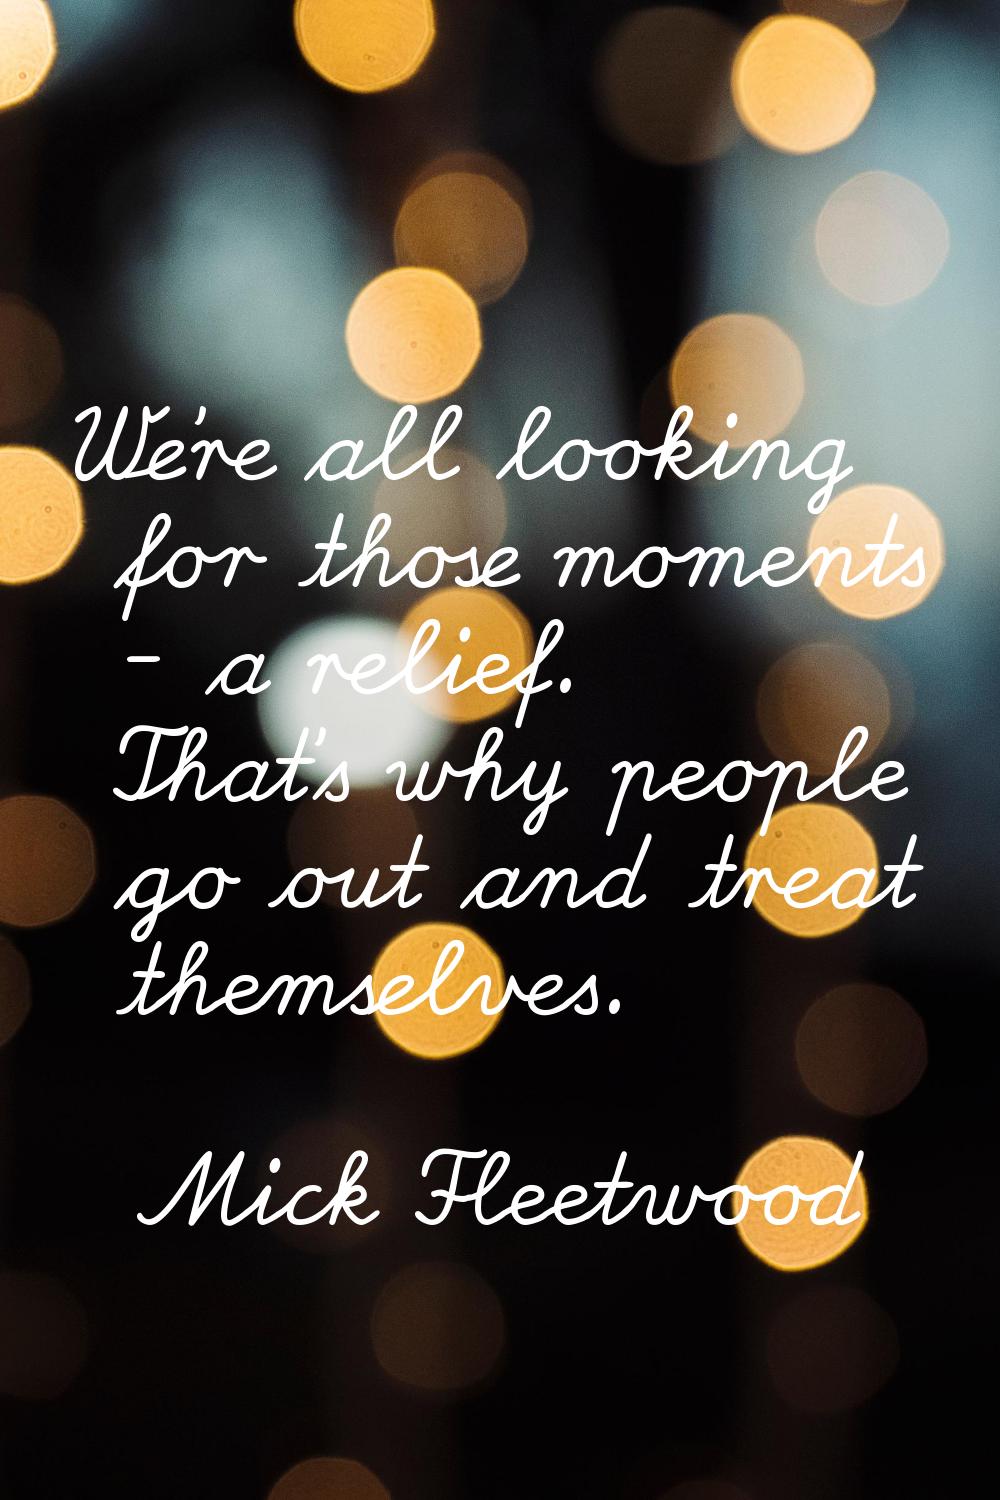 We're all looking for those moments - a relief. That's why people go out and treat themselves.